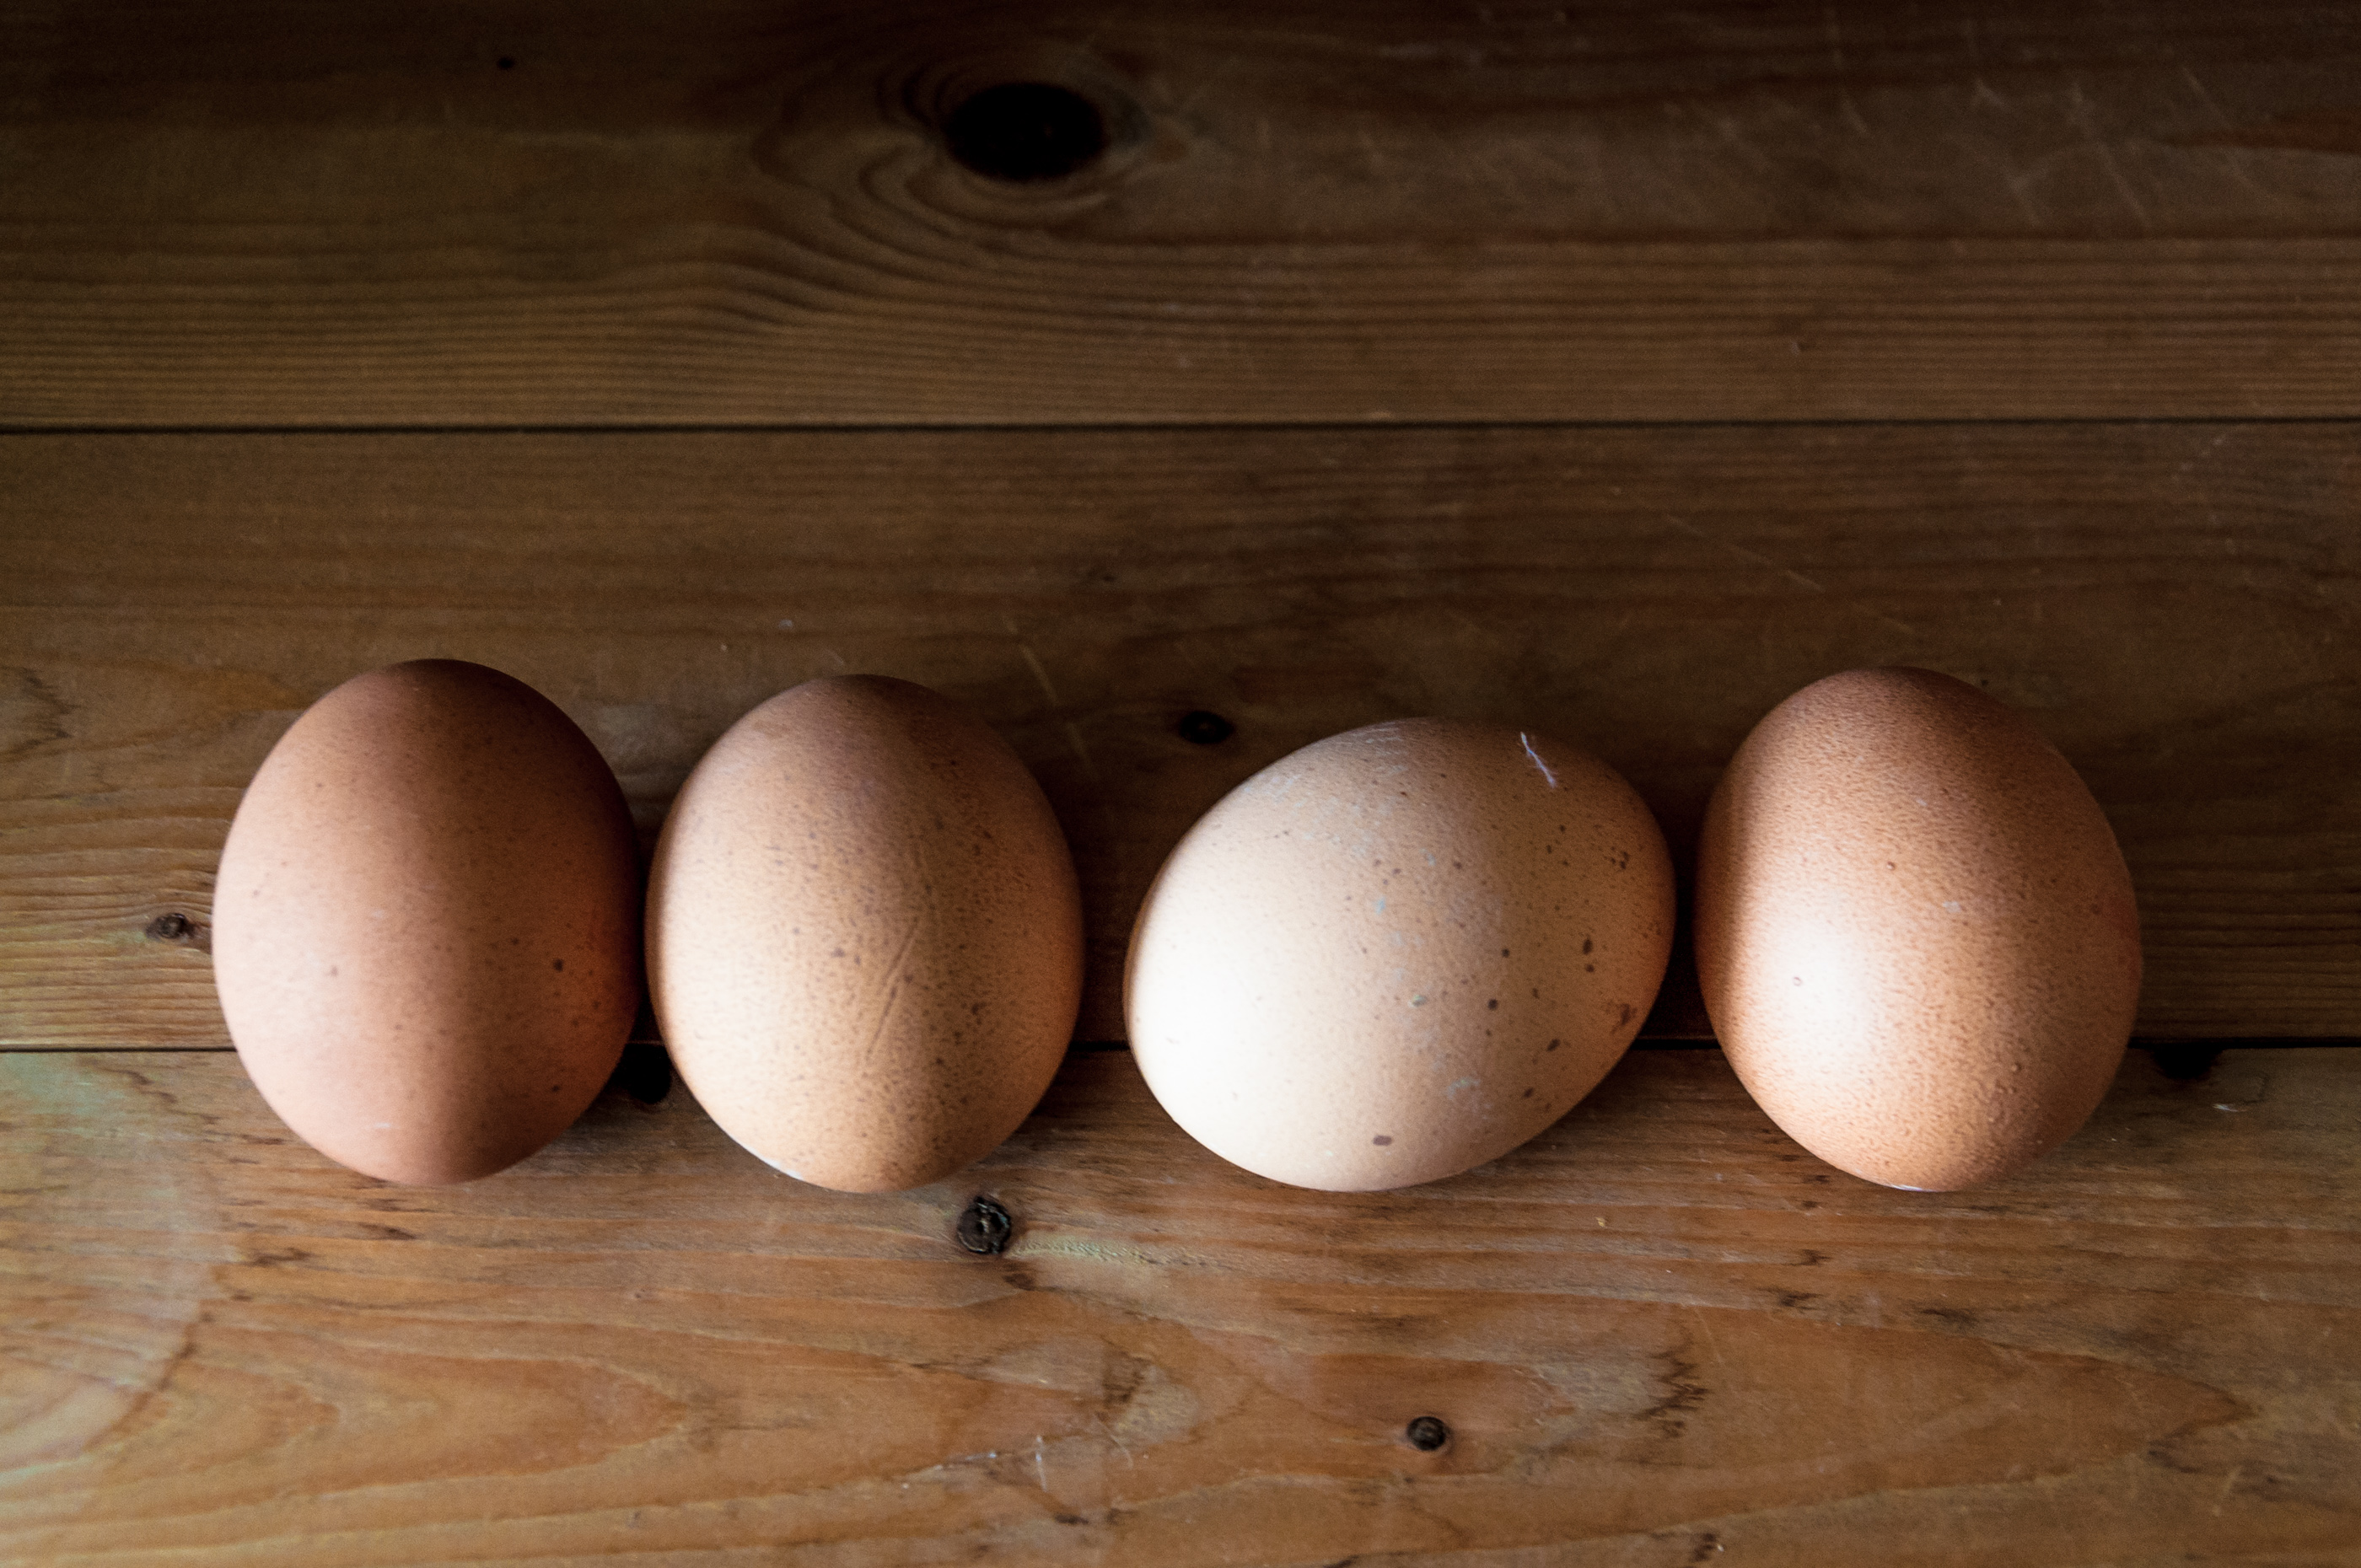 Eggs on wood background, Agriculture, Old, Image, Ingredient, HQ Photo